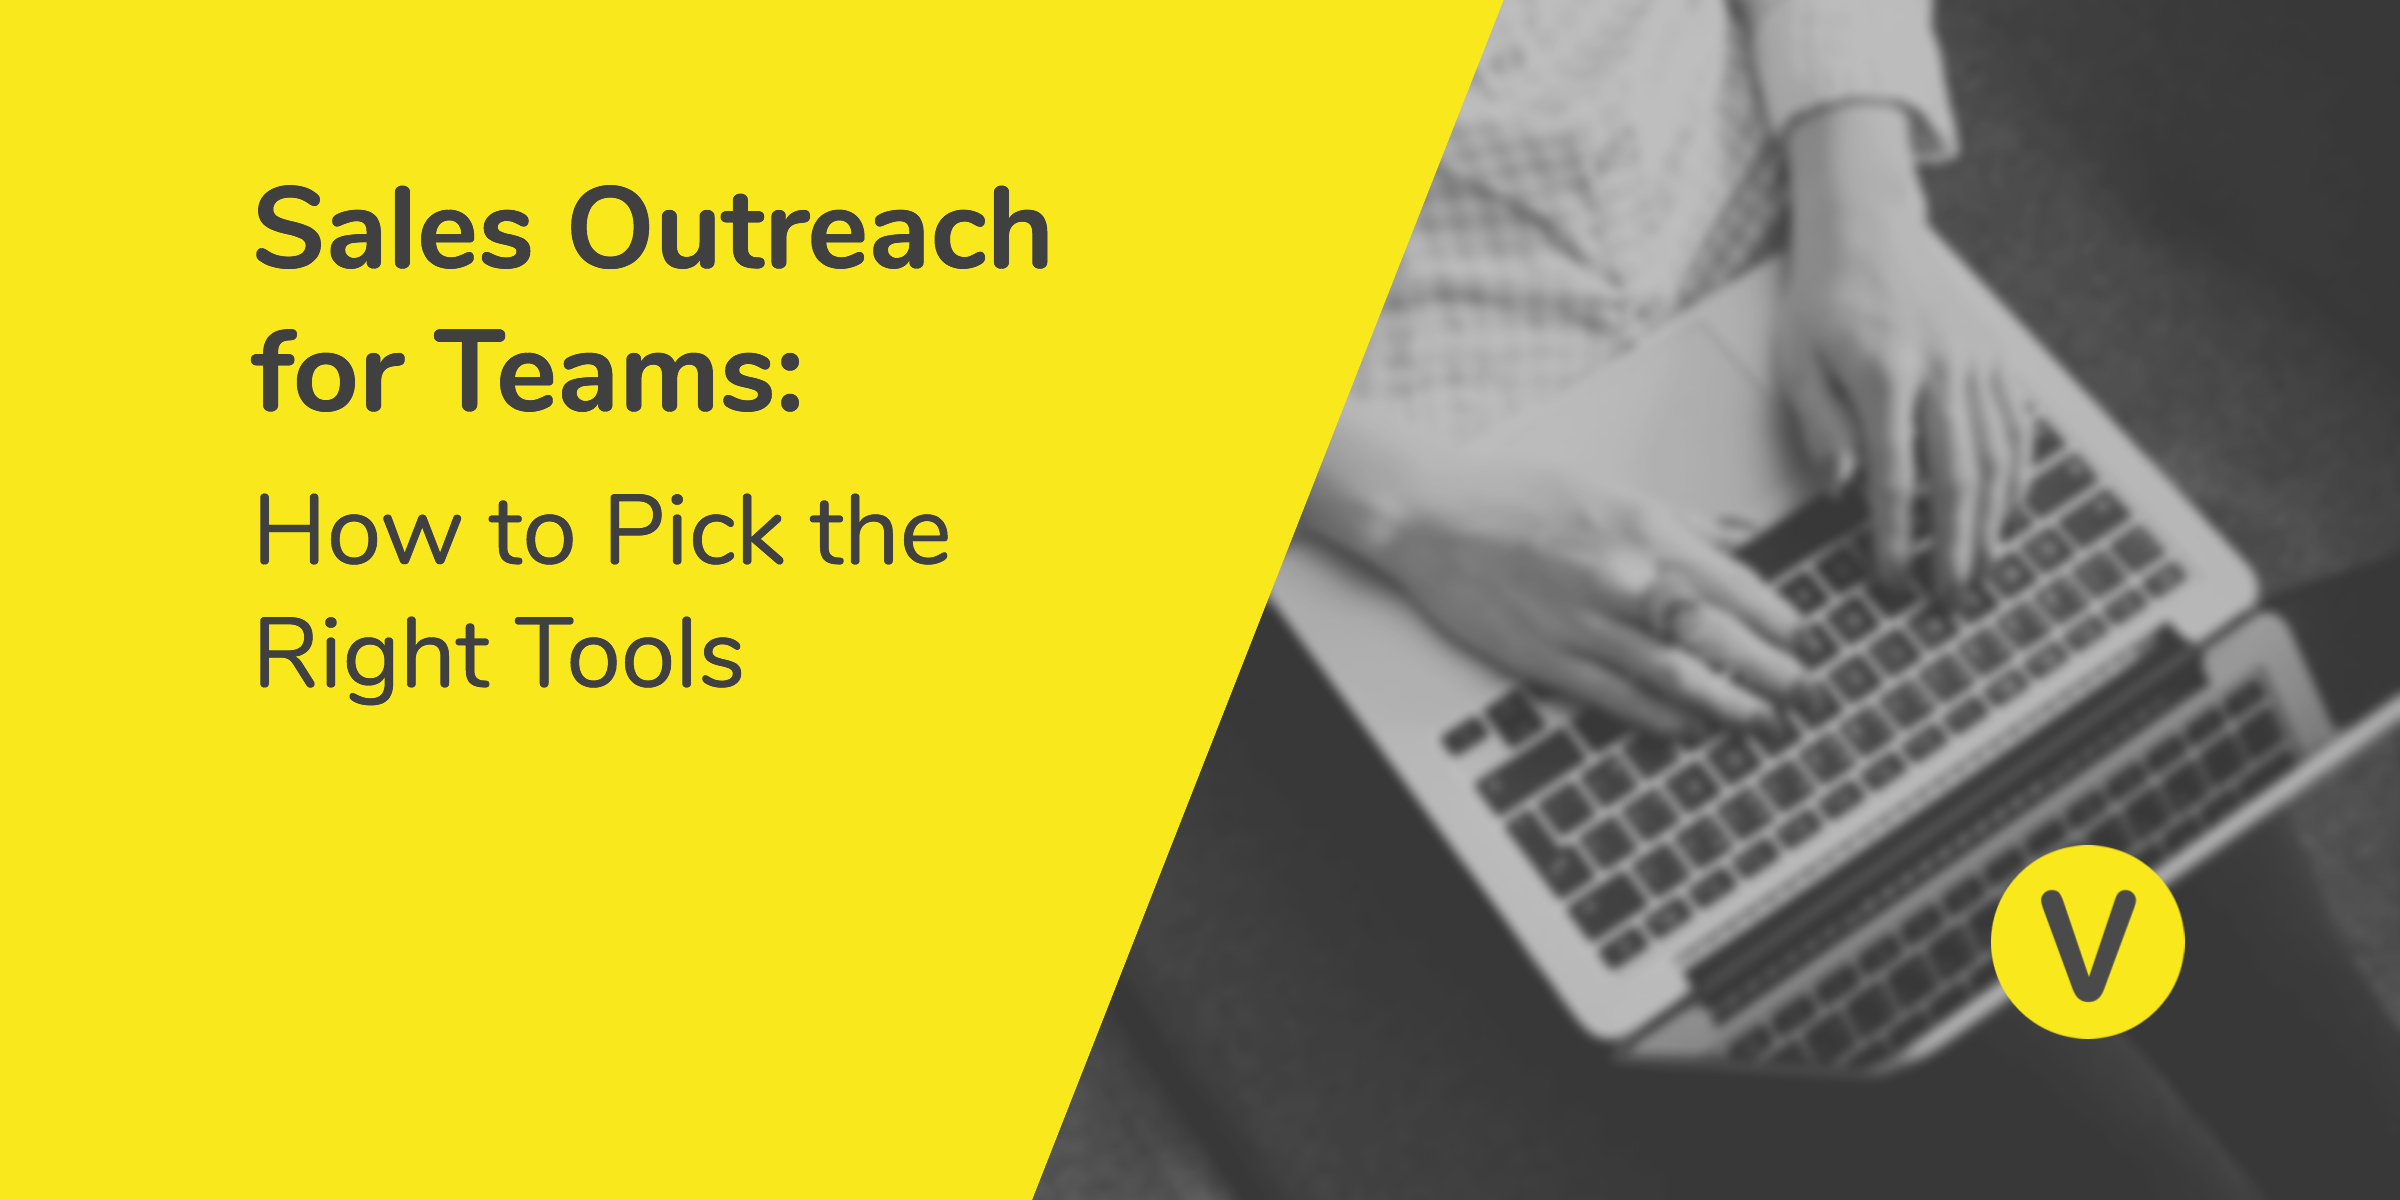 How to Pick the Right Sales Outreach Tools for Your Team